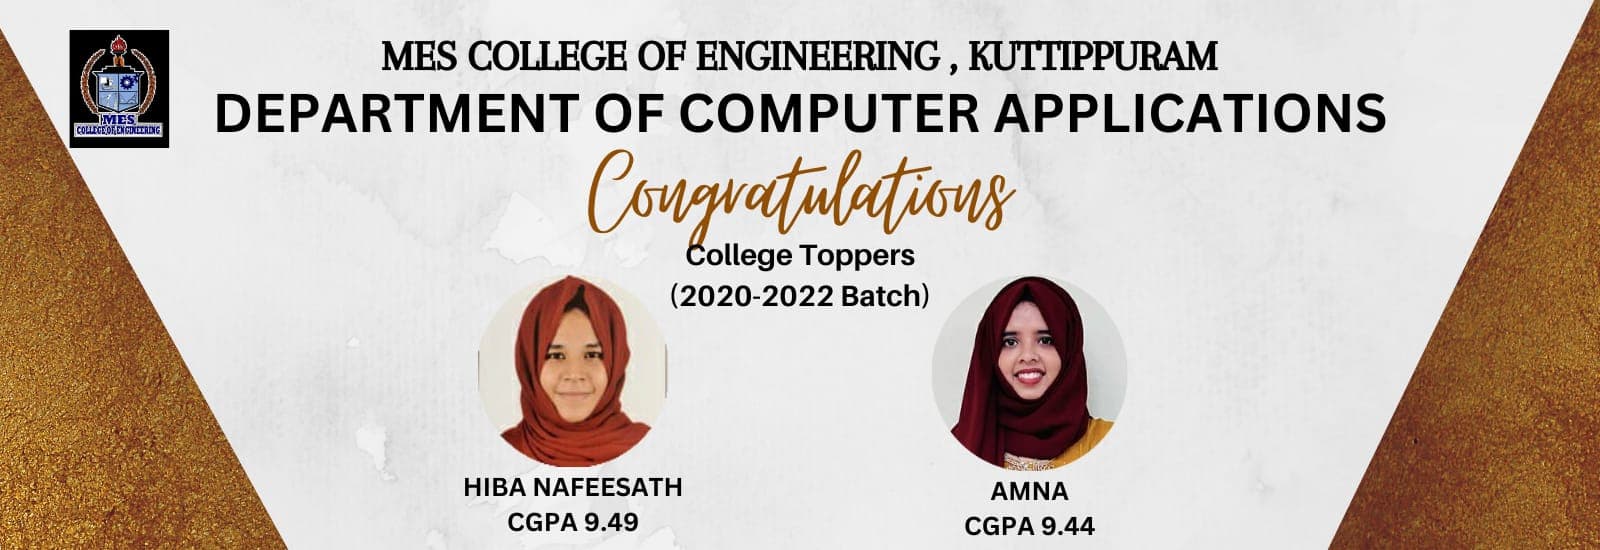 College Toppers 2020-2022 batch